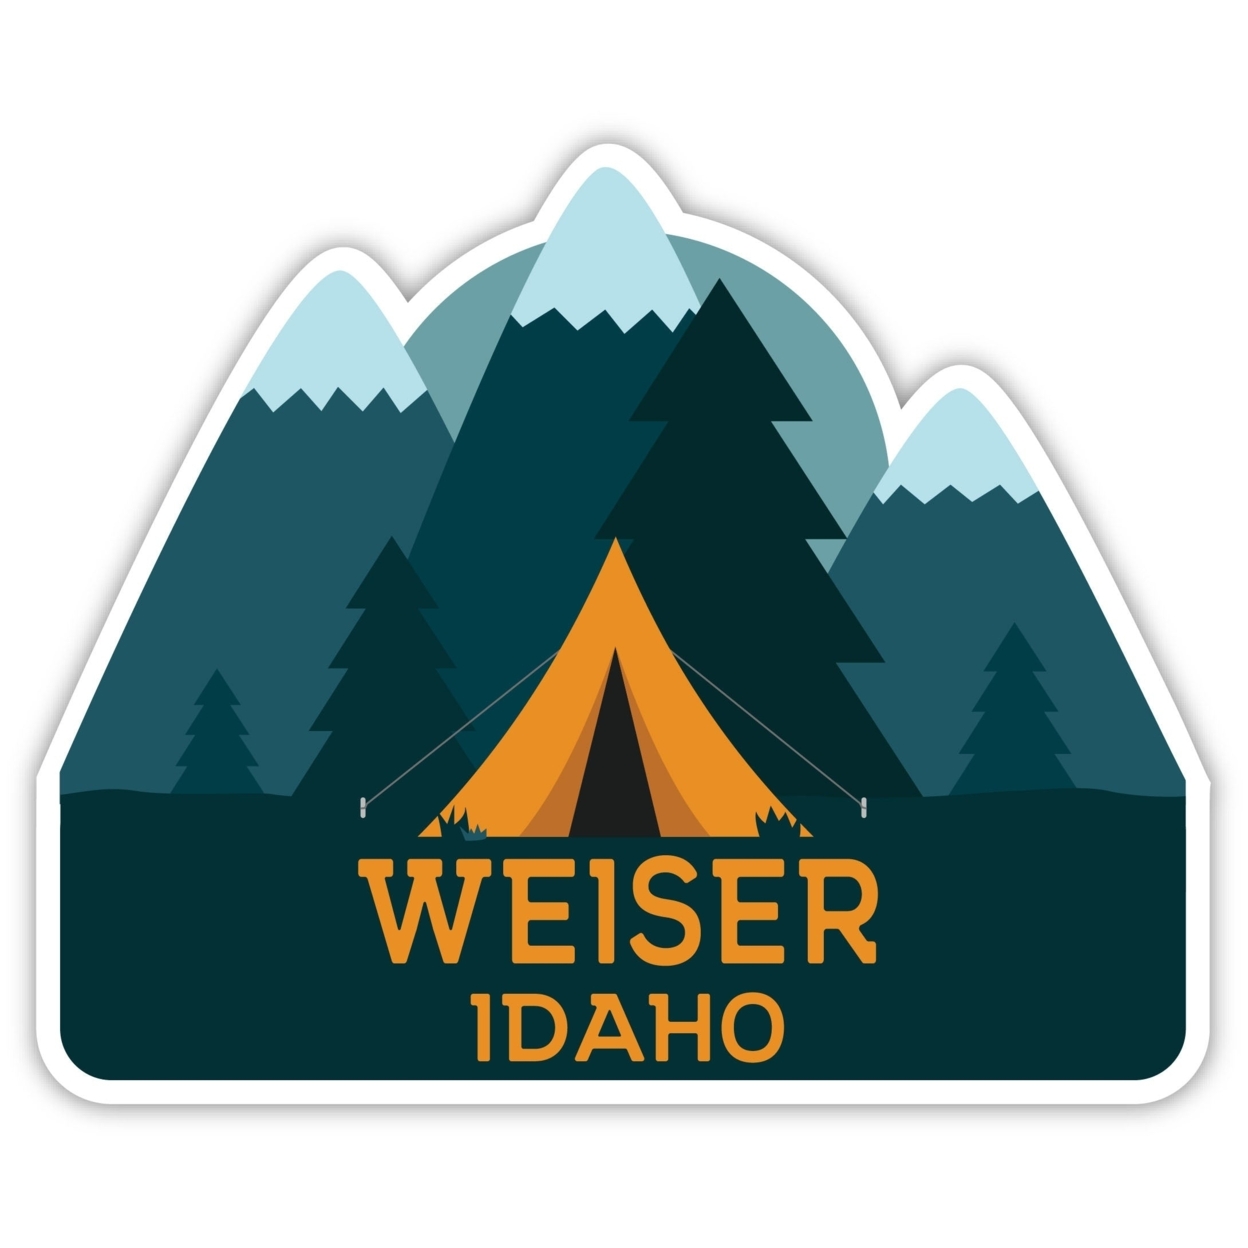 Weiser Idaho Souvenir Decorative Stickers (Choose Theme And Size) - Single Unit, 2-Inch, Camp Life